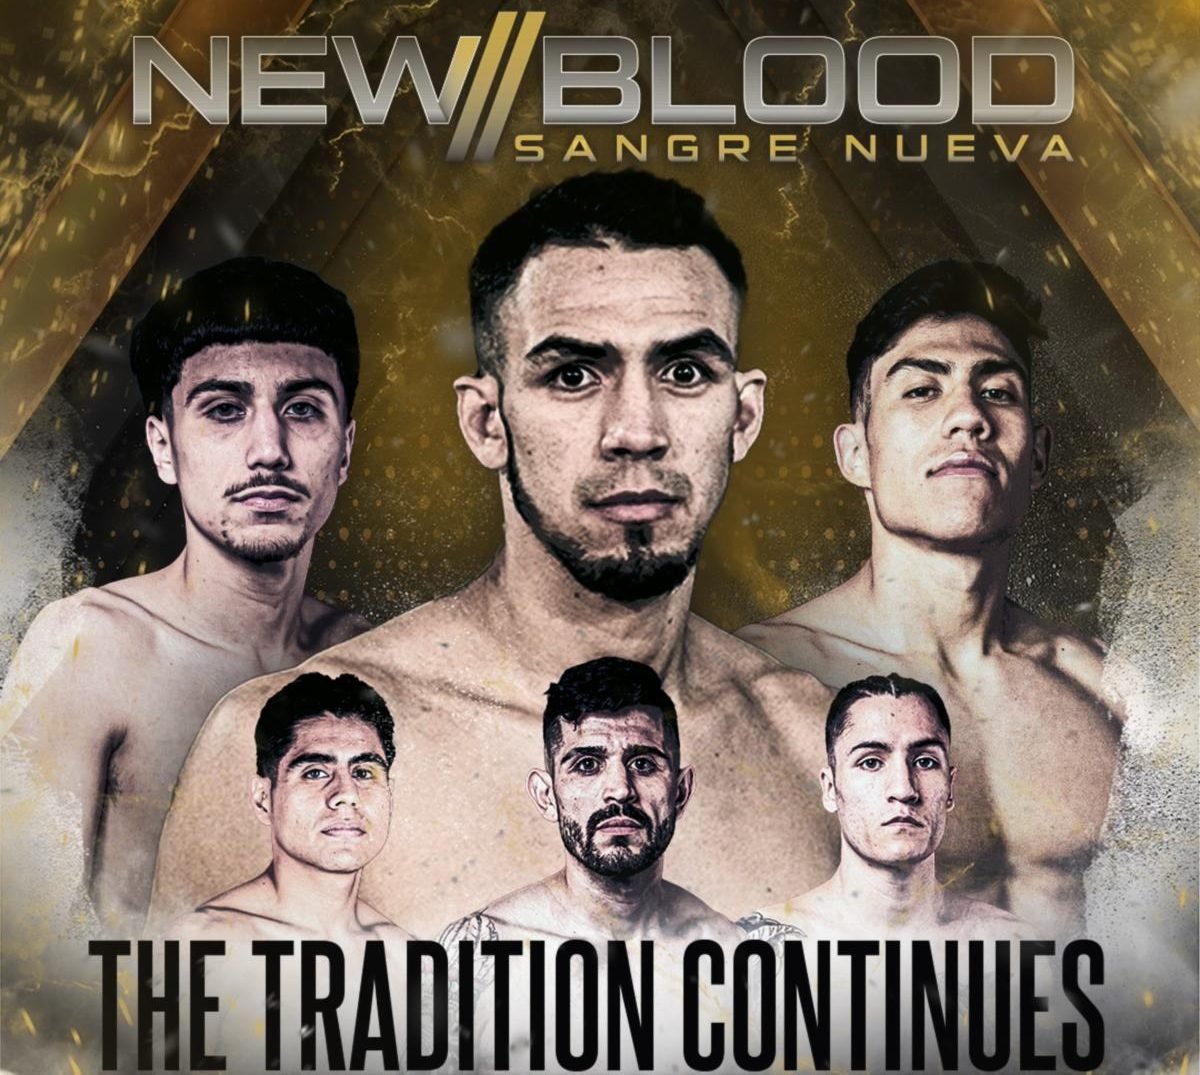 Camponovo Sports debuts boxing series ‘New Blood’ on September 9